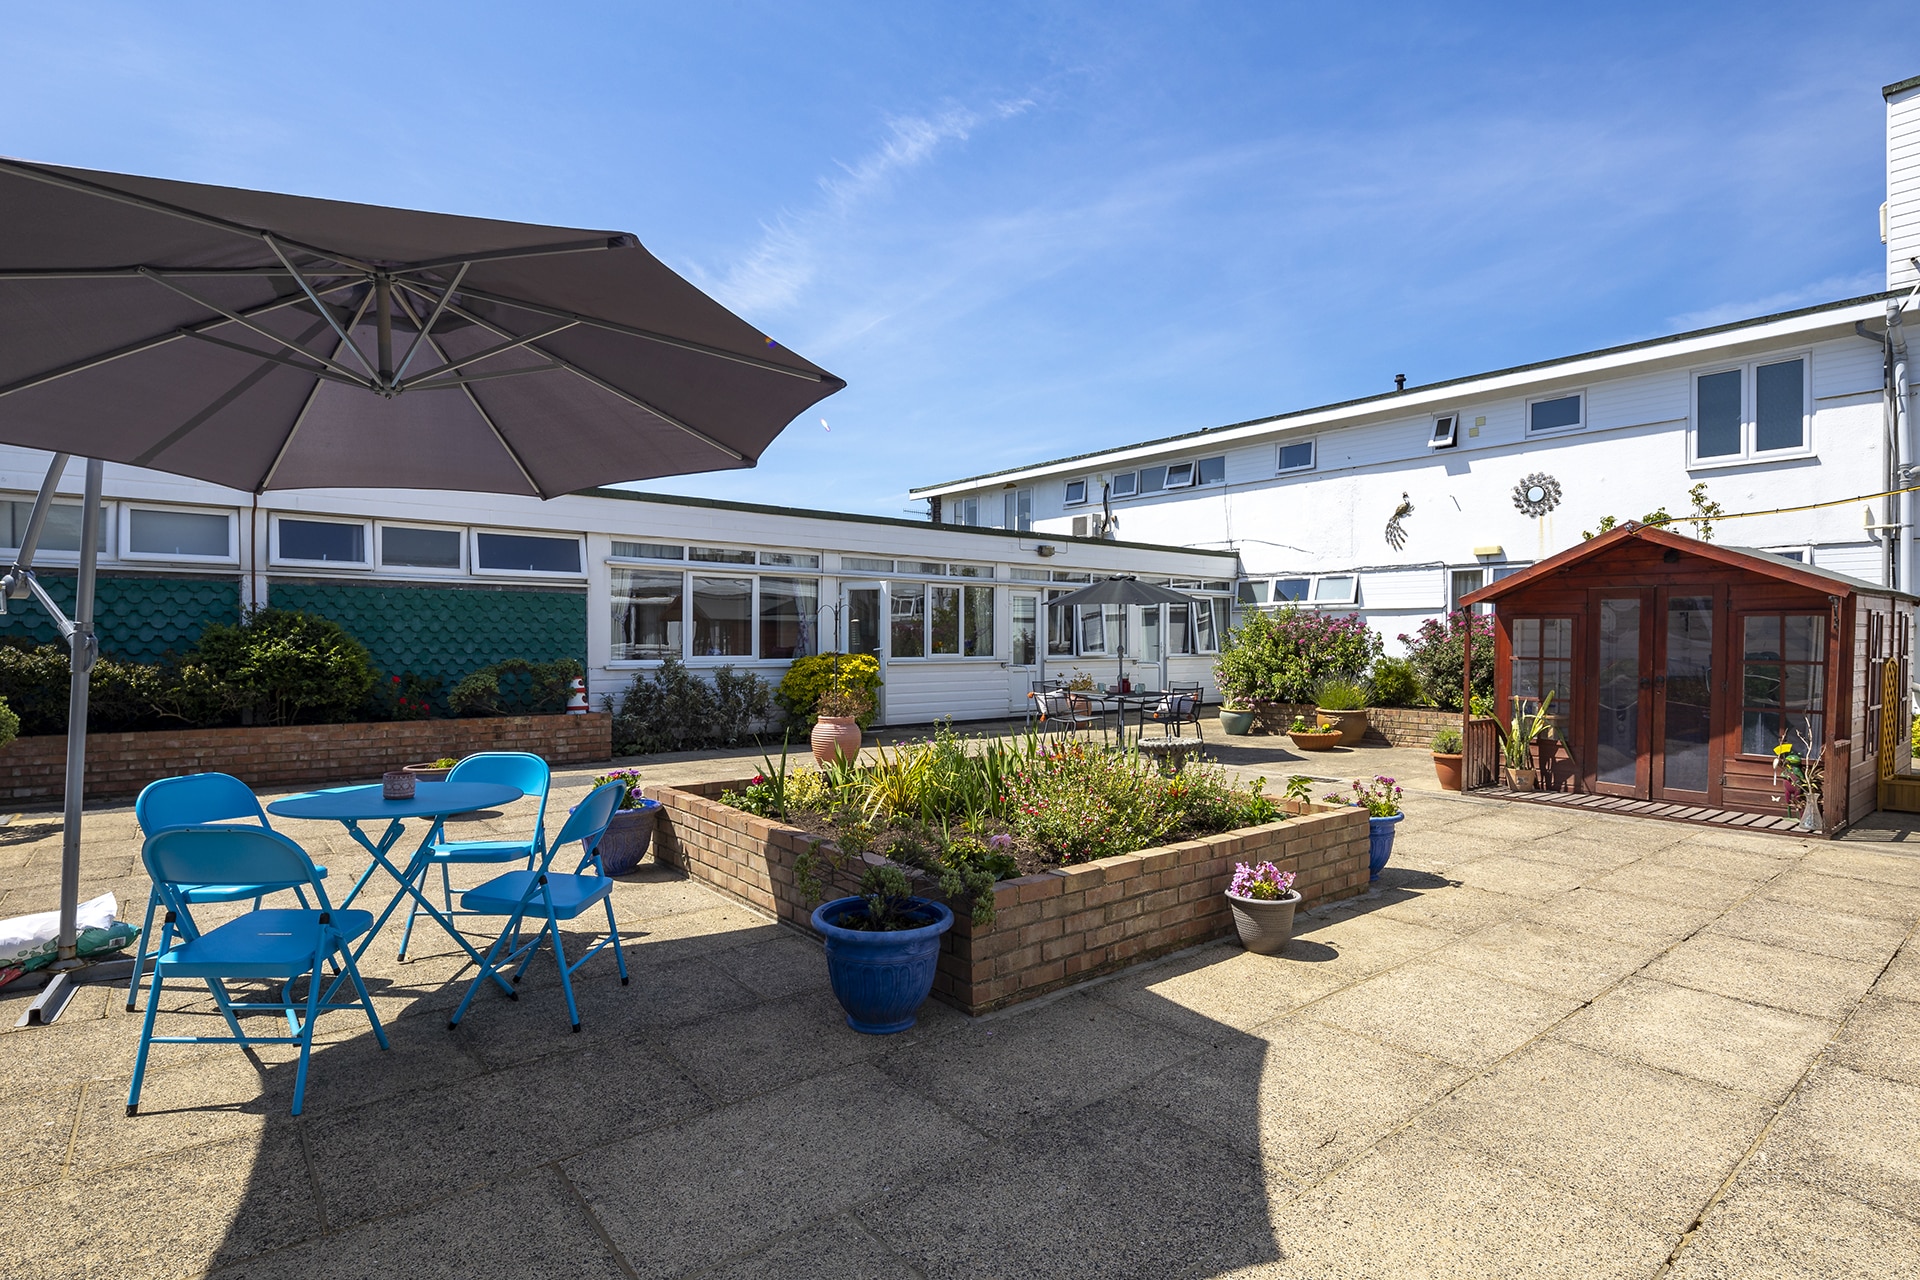 Courtyard at Cavell House Care Home in Shoreham-by-Sea.